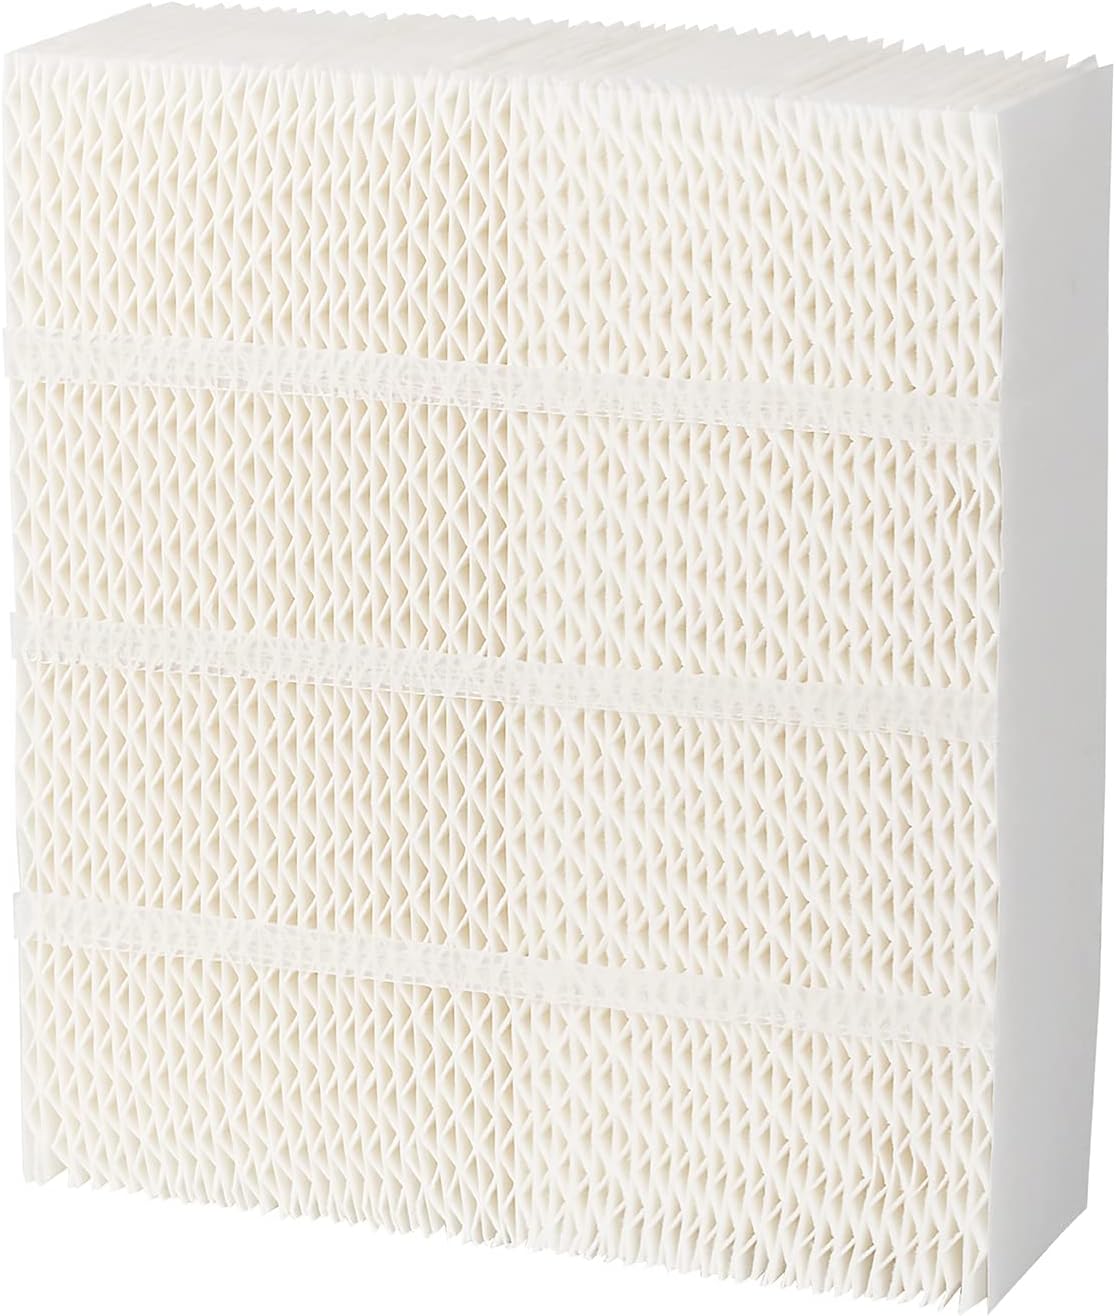 antoble 1043 Humidifier Super Wick Filter Replacement for Essick Air EP9500 EP9700 EP9800 EP9R500 EP9R700 EP9R800 826000 831000, Bemis